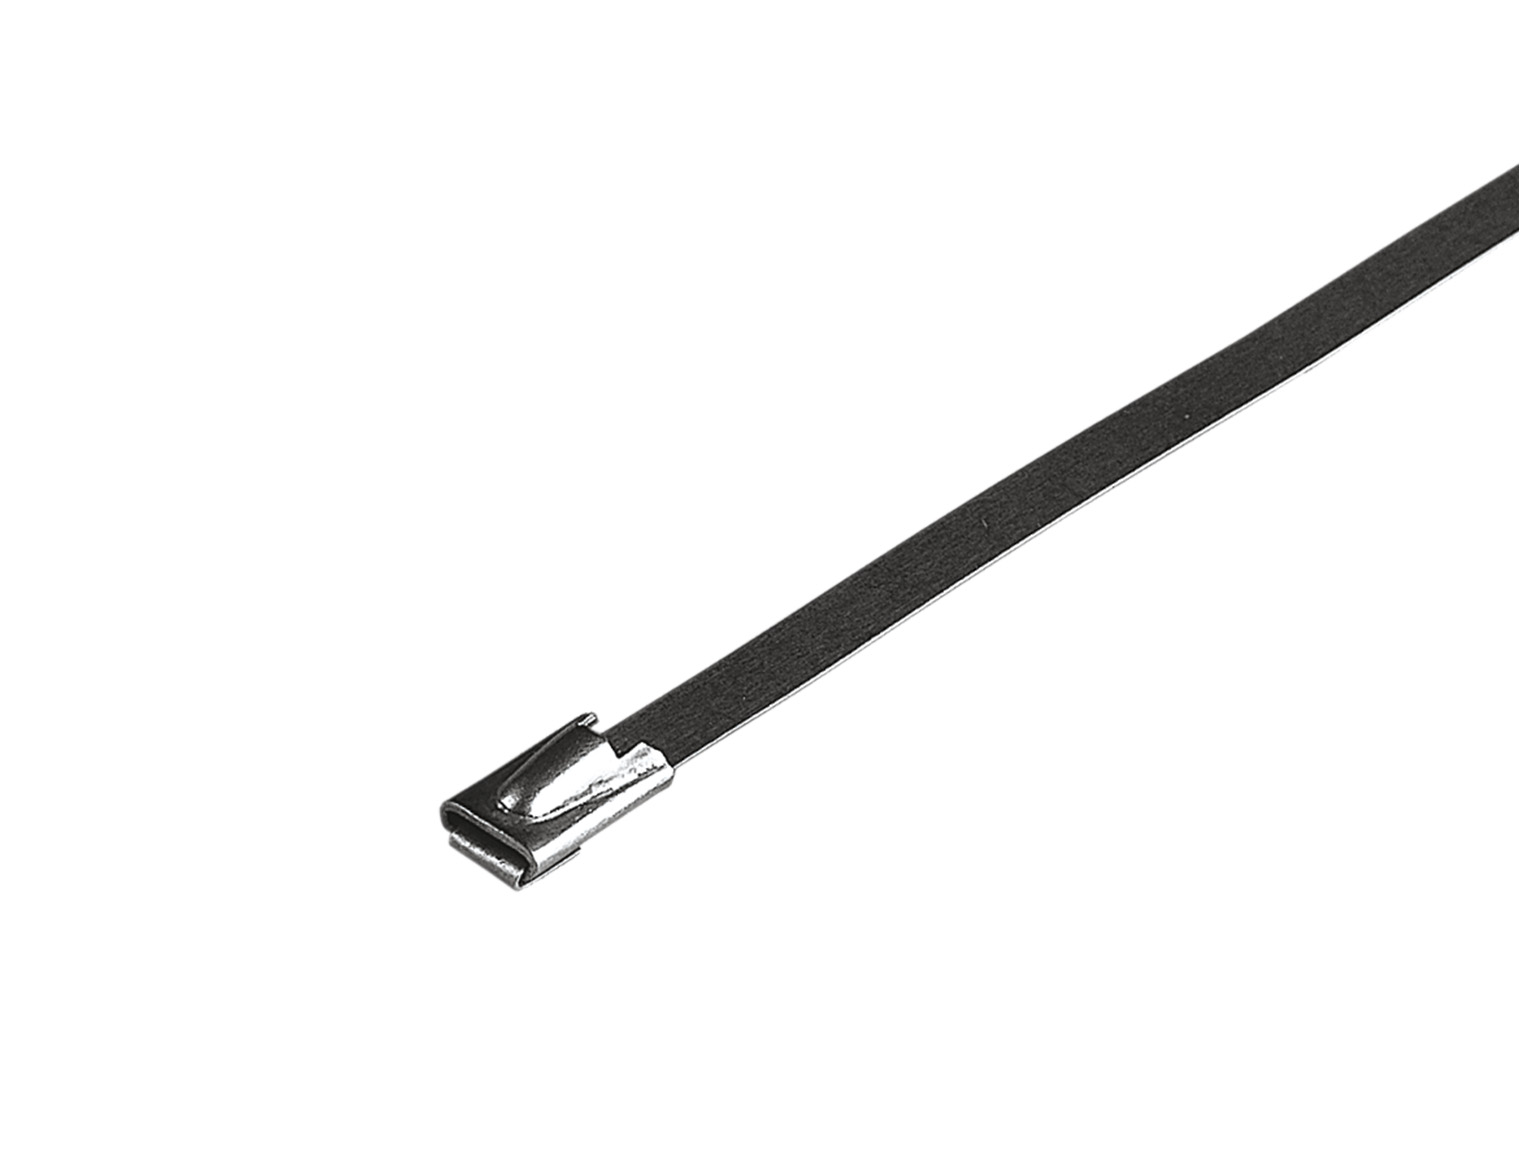 E Cable tie stainless steel